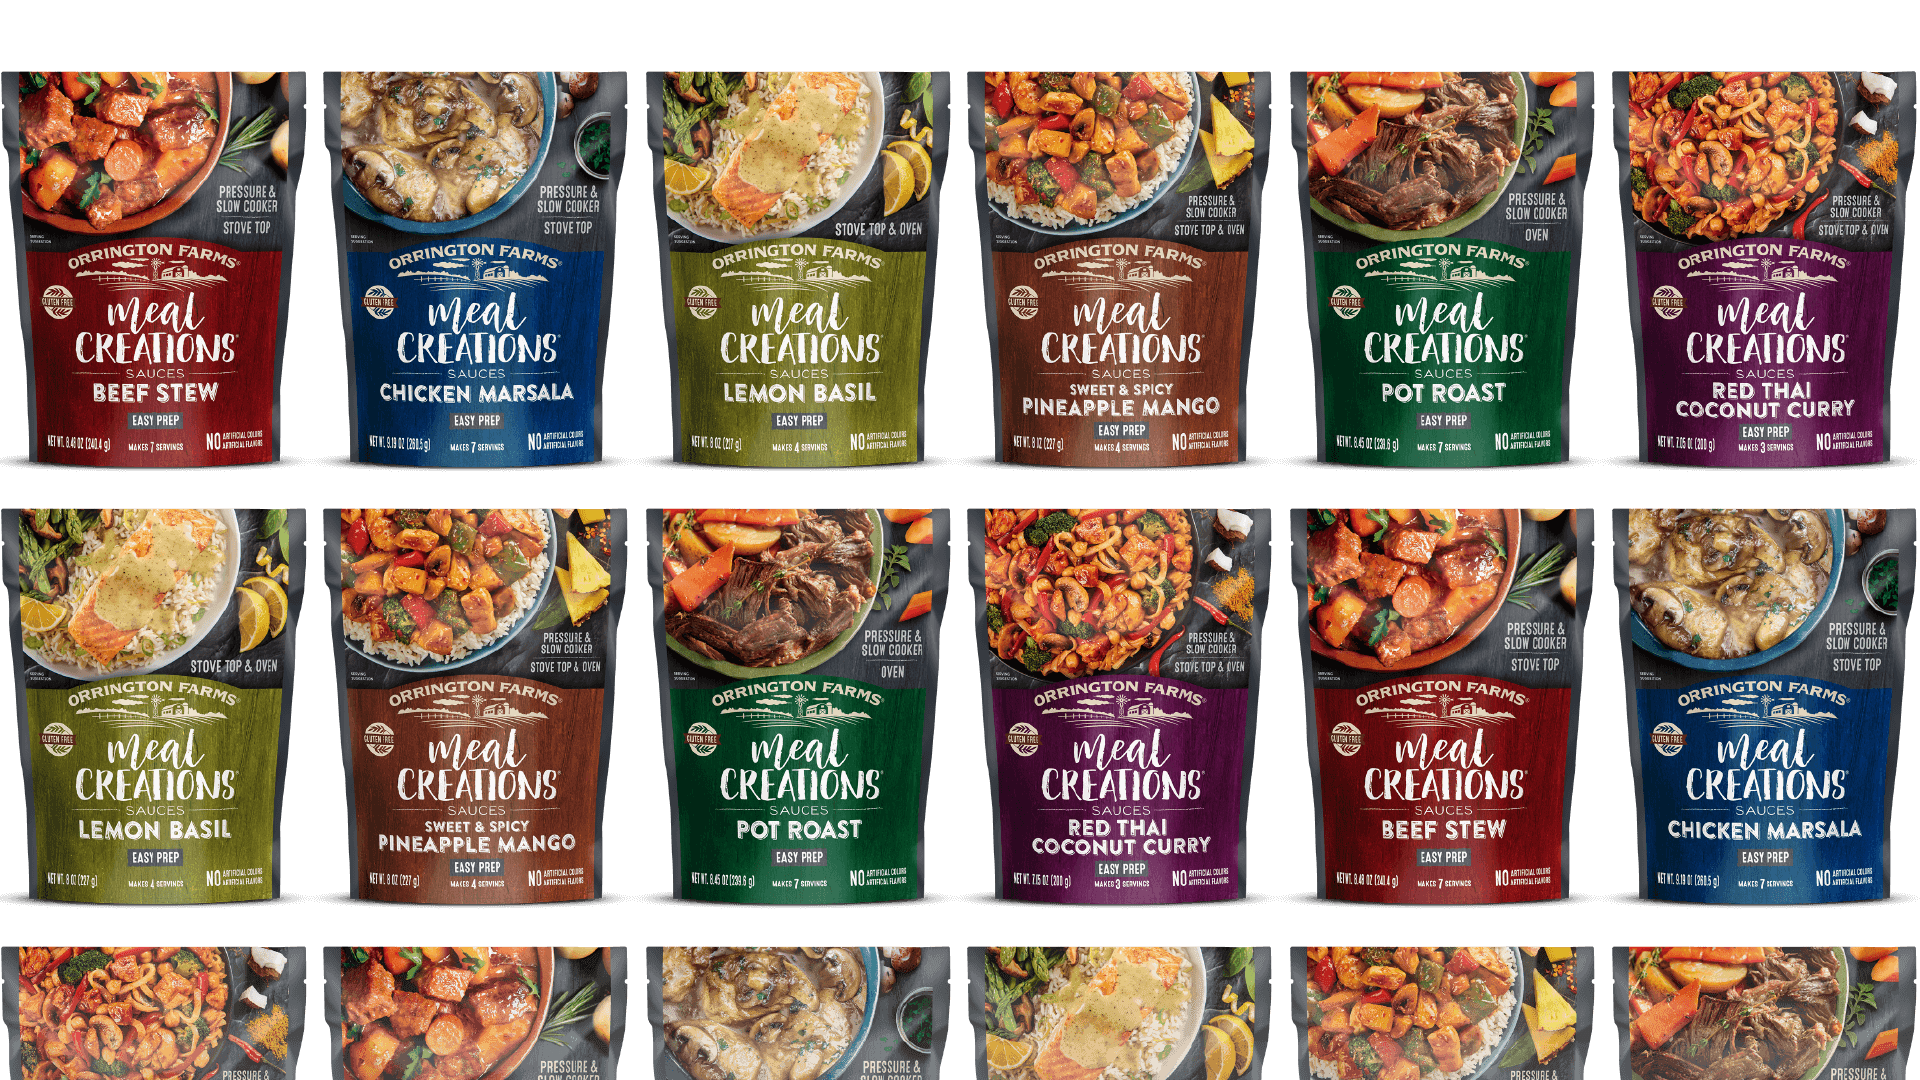 Orrington Farms Meal Creations Products Pouches Wall